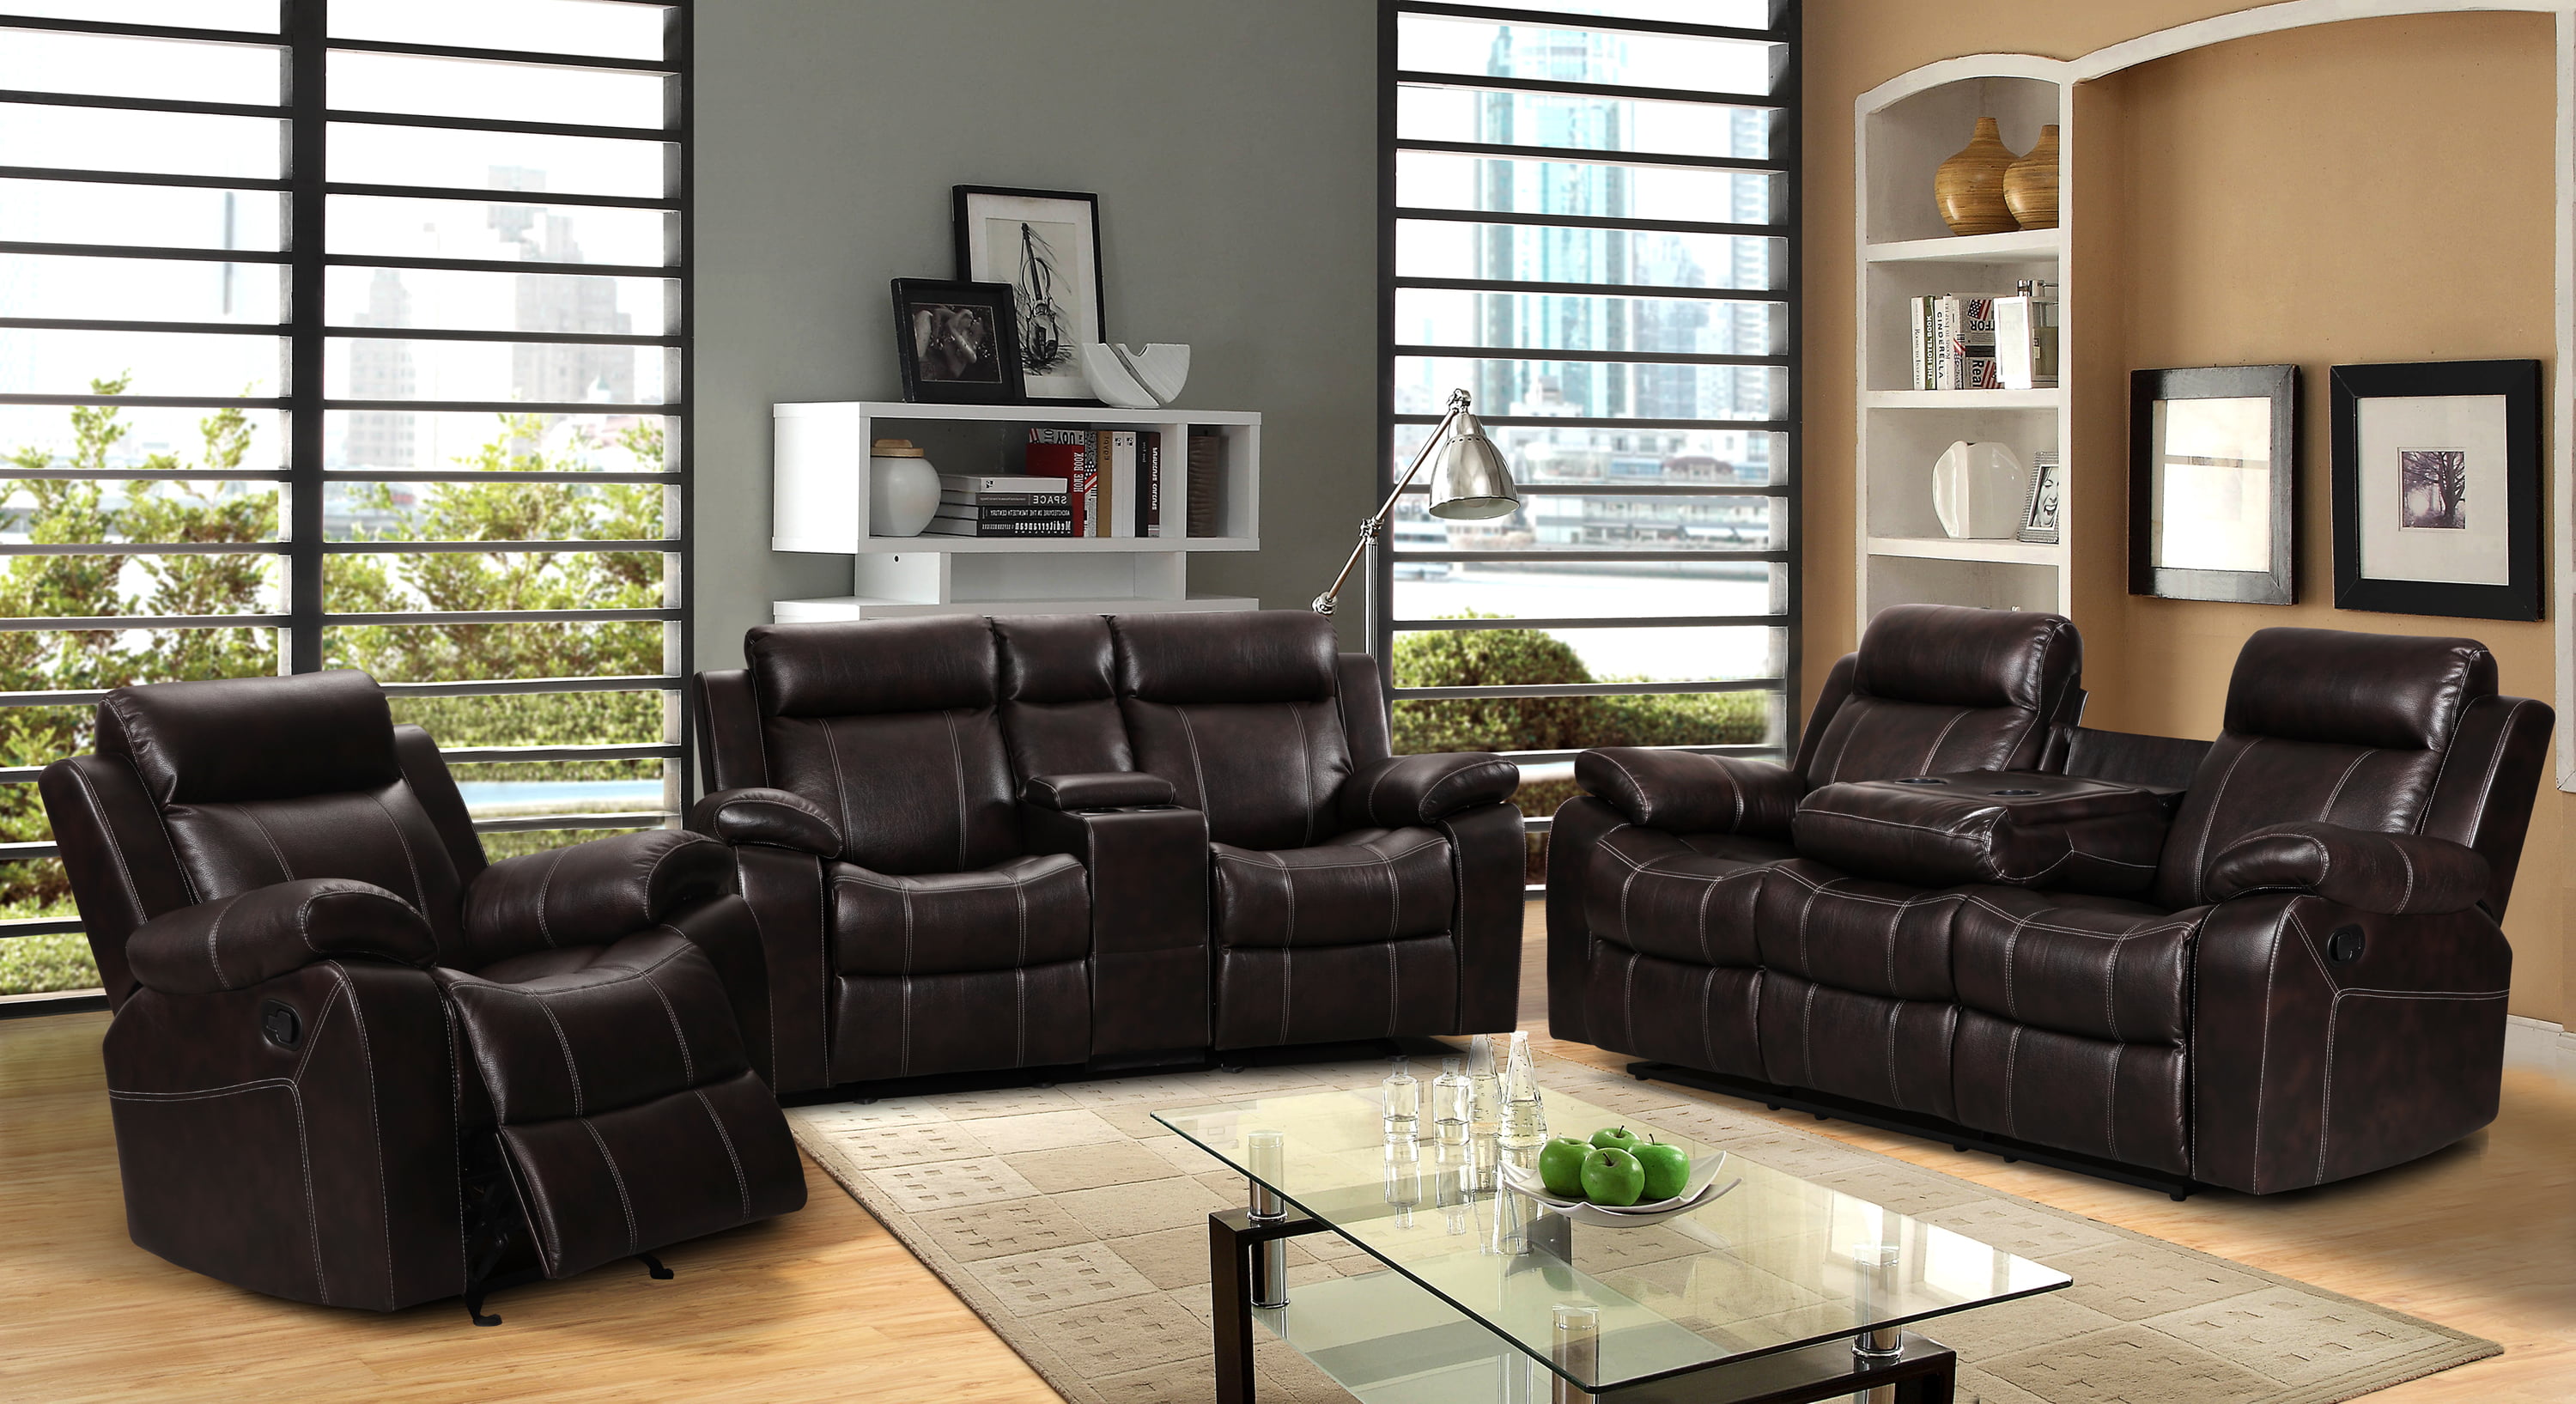 Vivienne Dark Brown Leather Air 3 pc Reclining Sofa set with